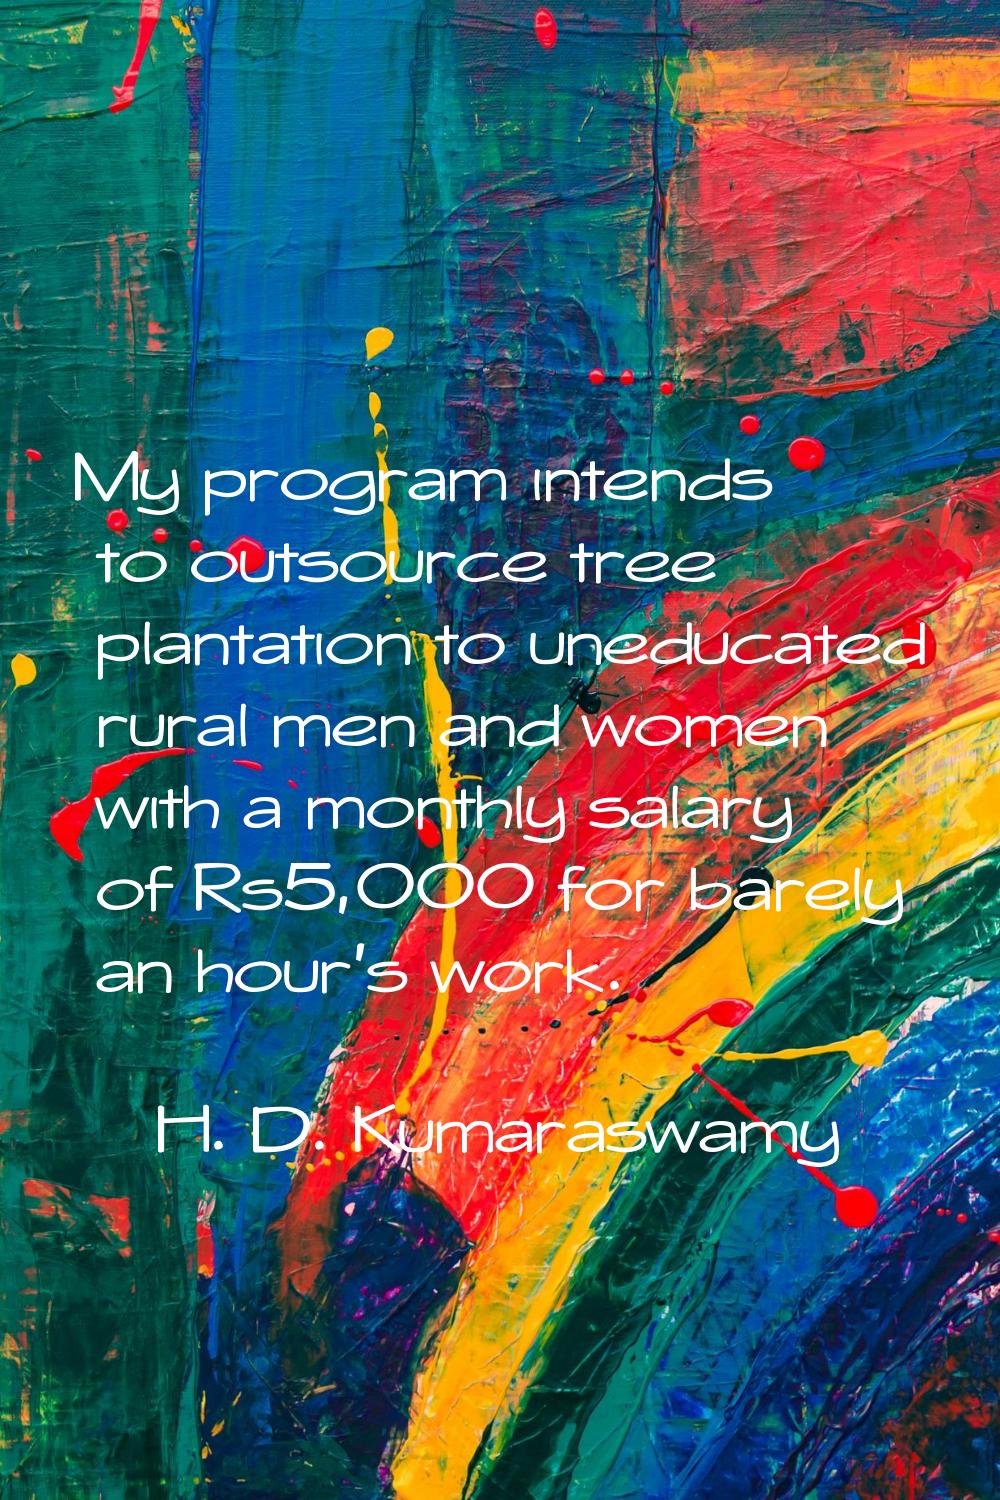 My program intends to outsource tree plantation to uneducated rural men and women with a monthly sa